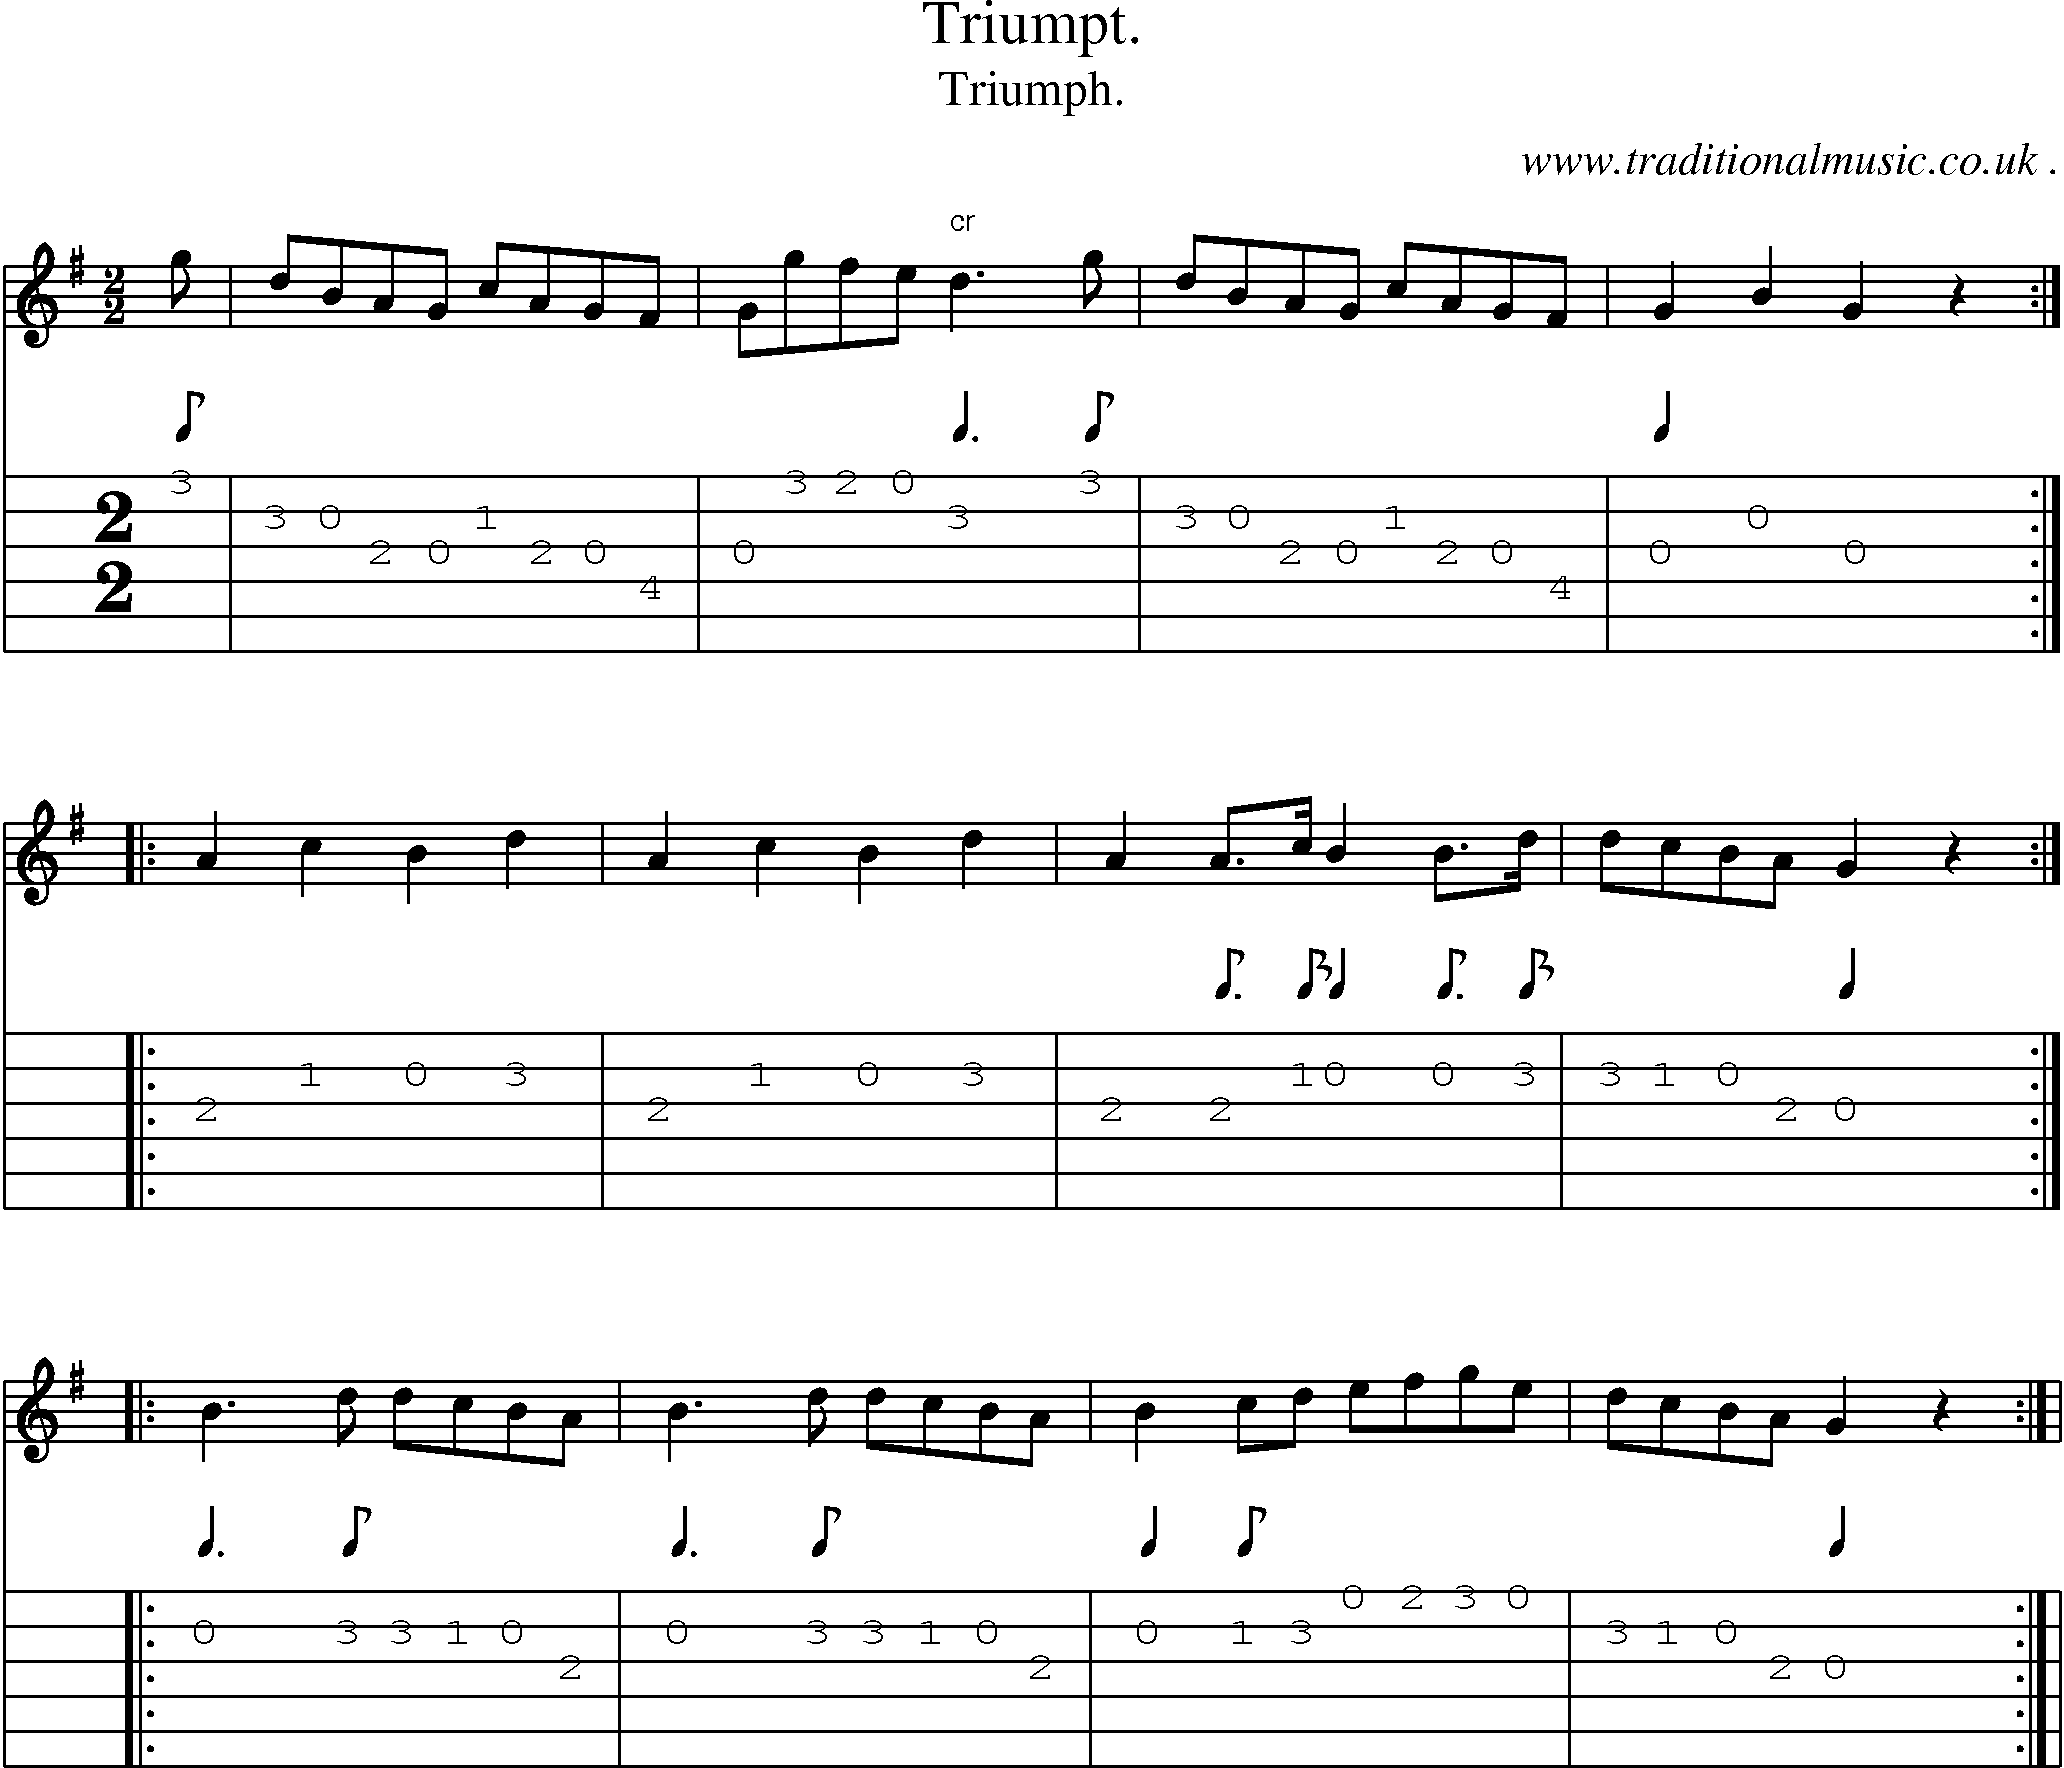 Sheet-Music and Guitar Tabs for Triumpt